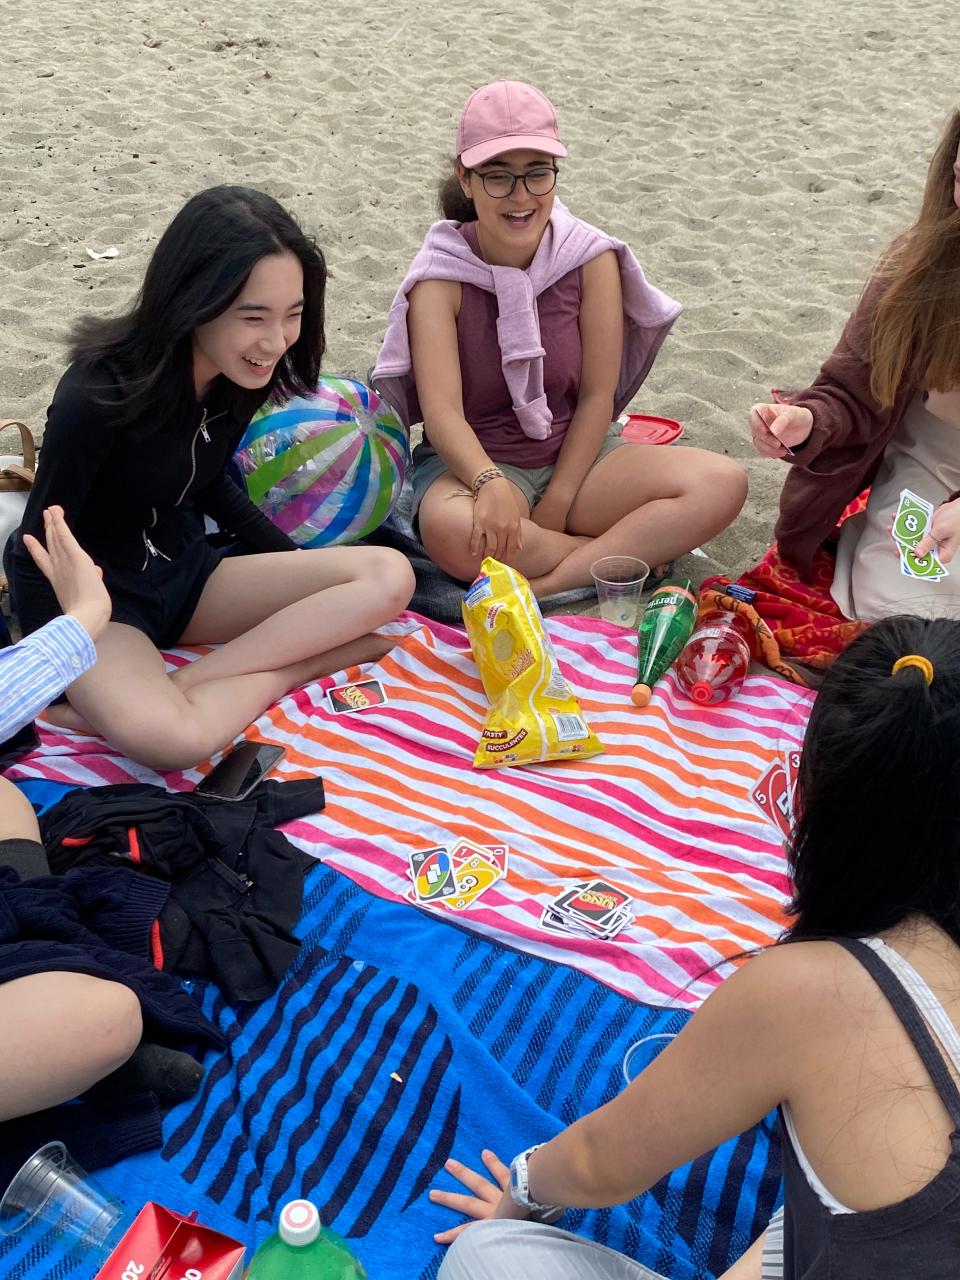 Nora Sun (top left) takes part in a social event with chapter members of the Talaria Summer Institute, a research program for teens which she founded. The 17-year-old budding research scientist lives part-time in Jacksonville.